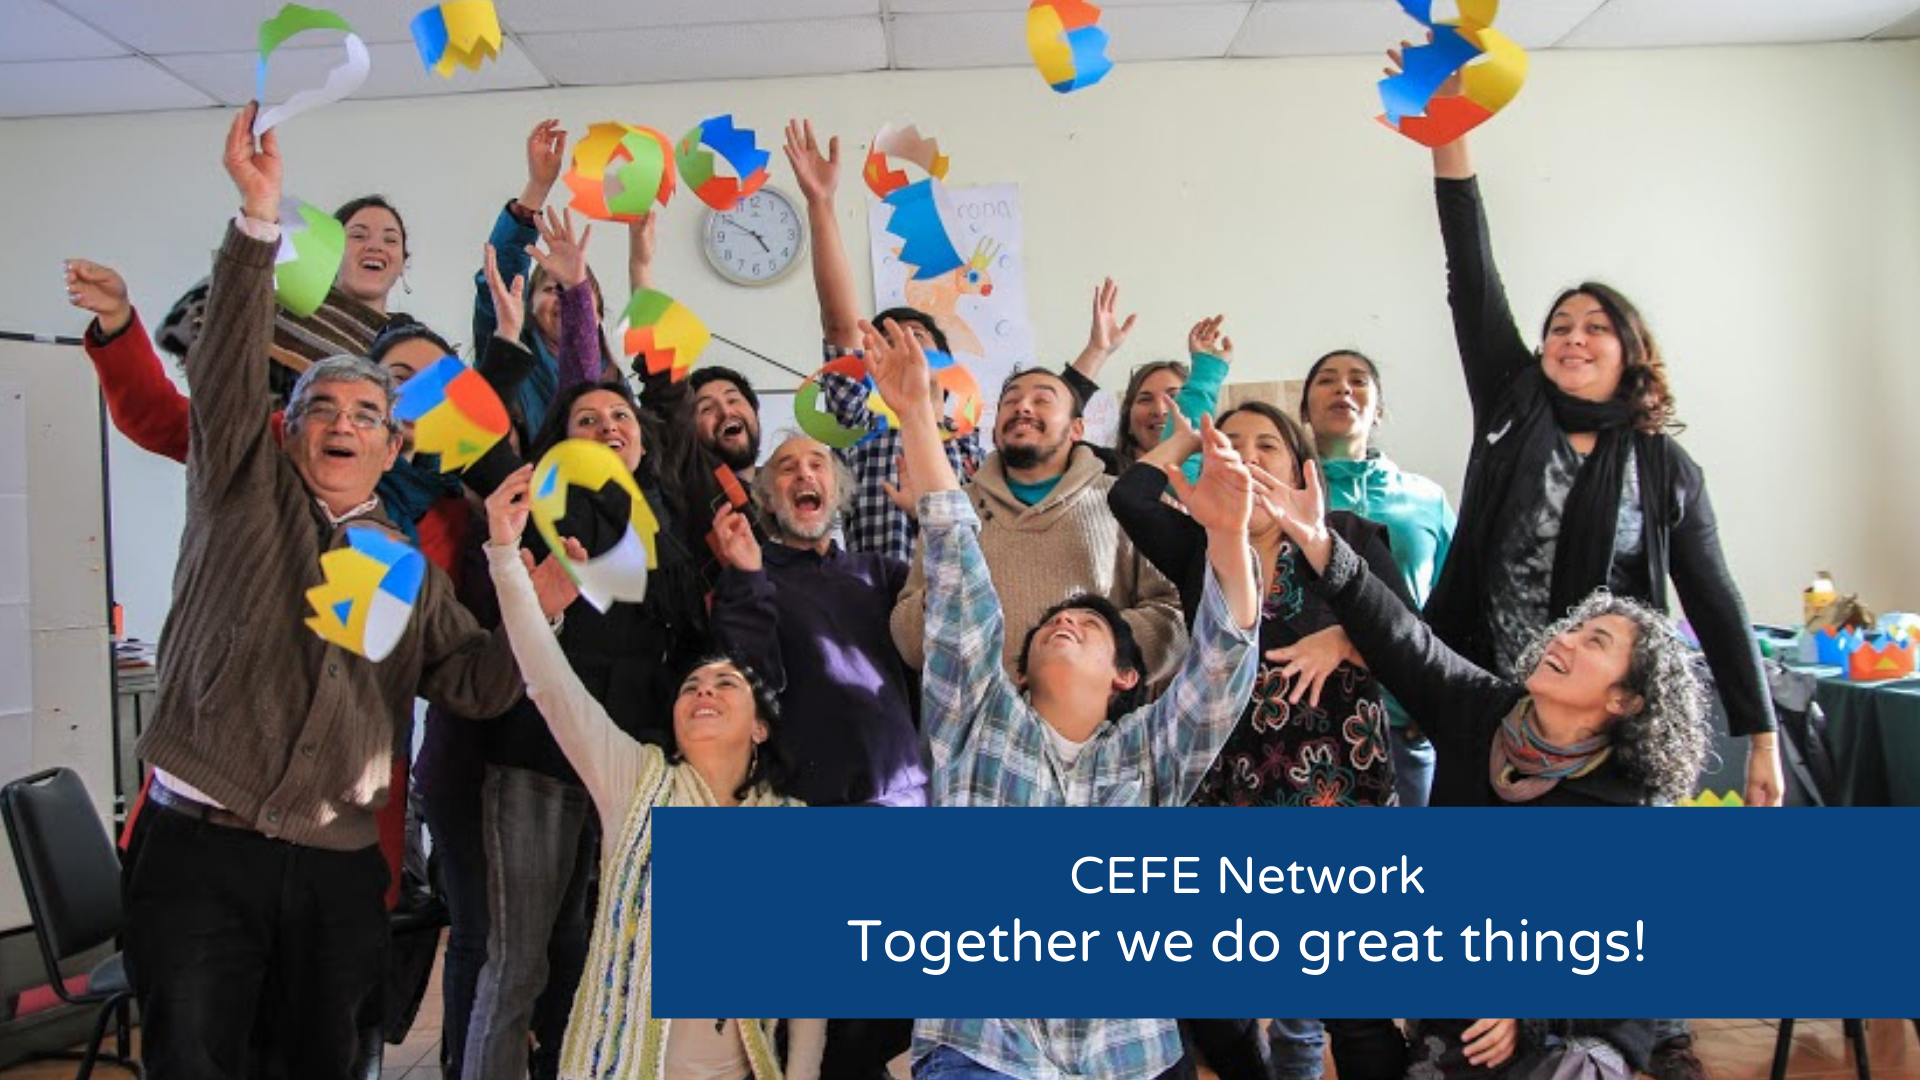 CEFE Network – Together we do great things!